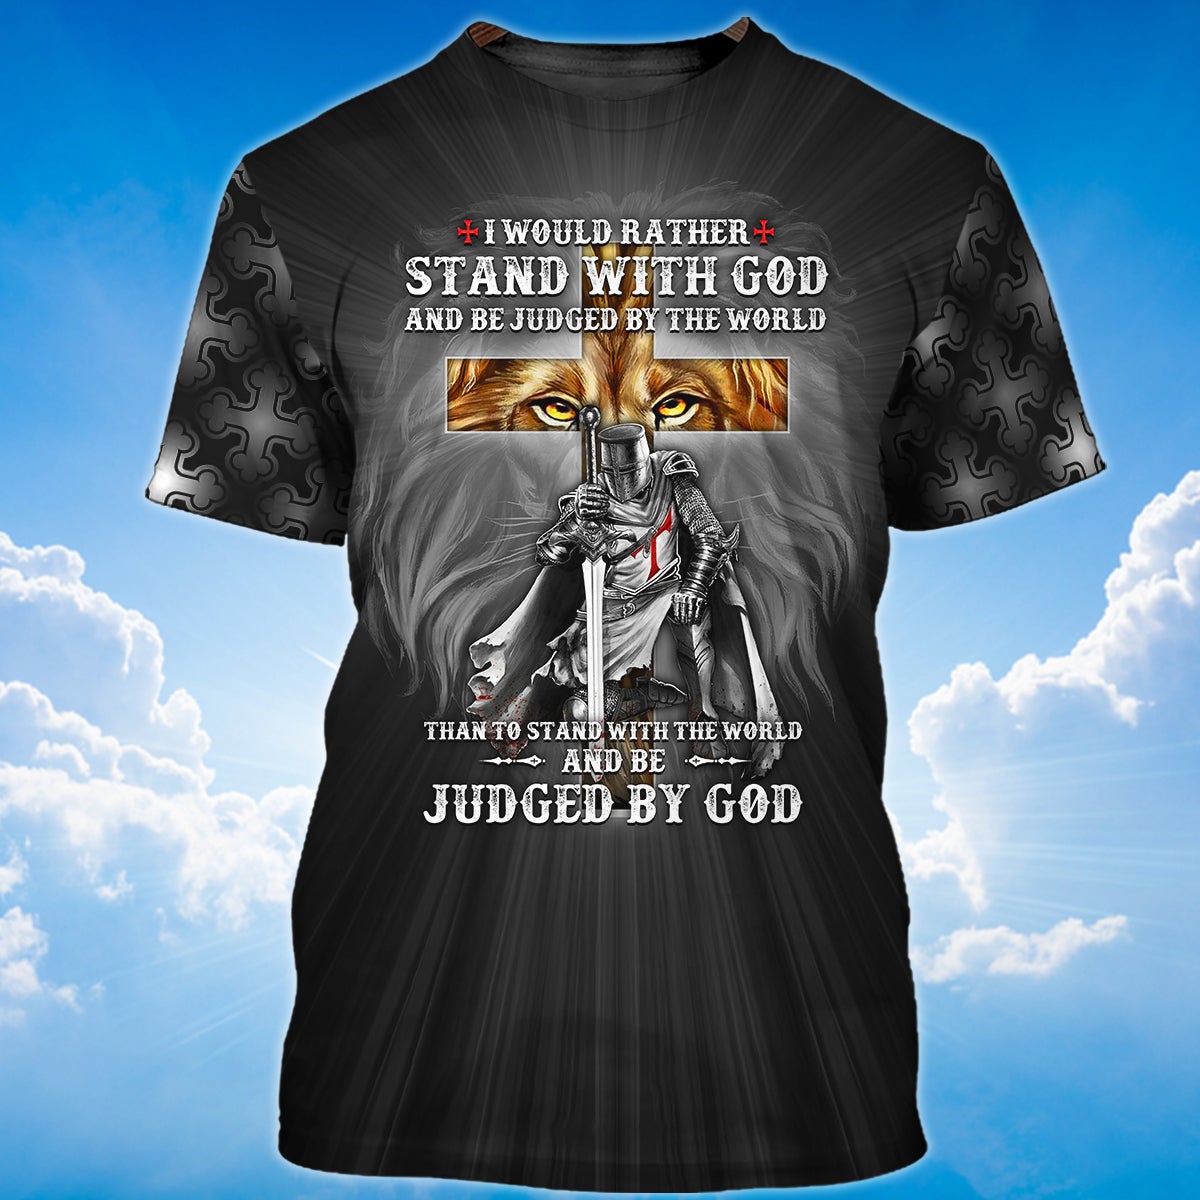 3D Knight Templar T Shirt I Would Rather Stand With God Shirt Coolspod